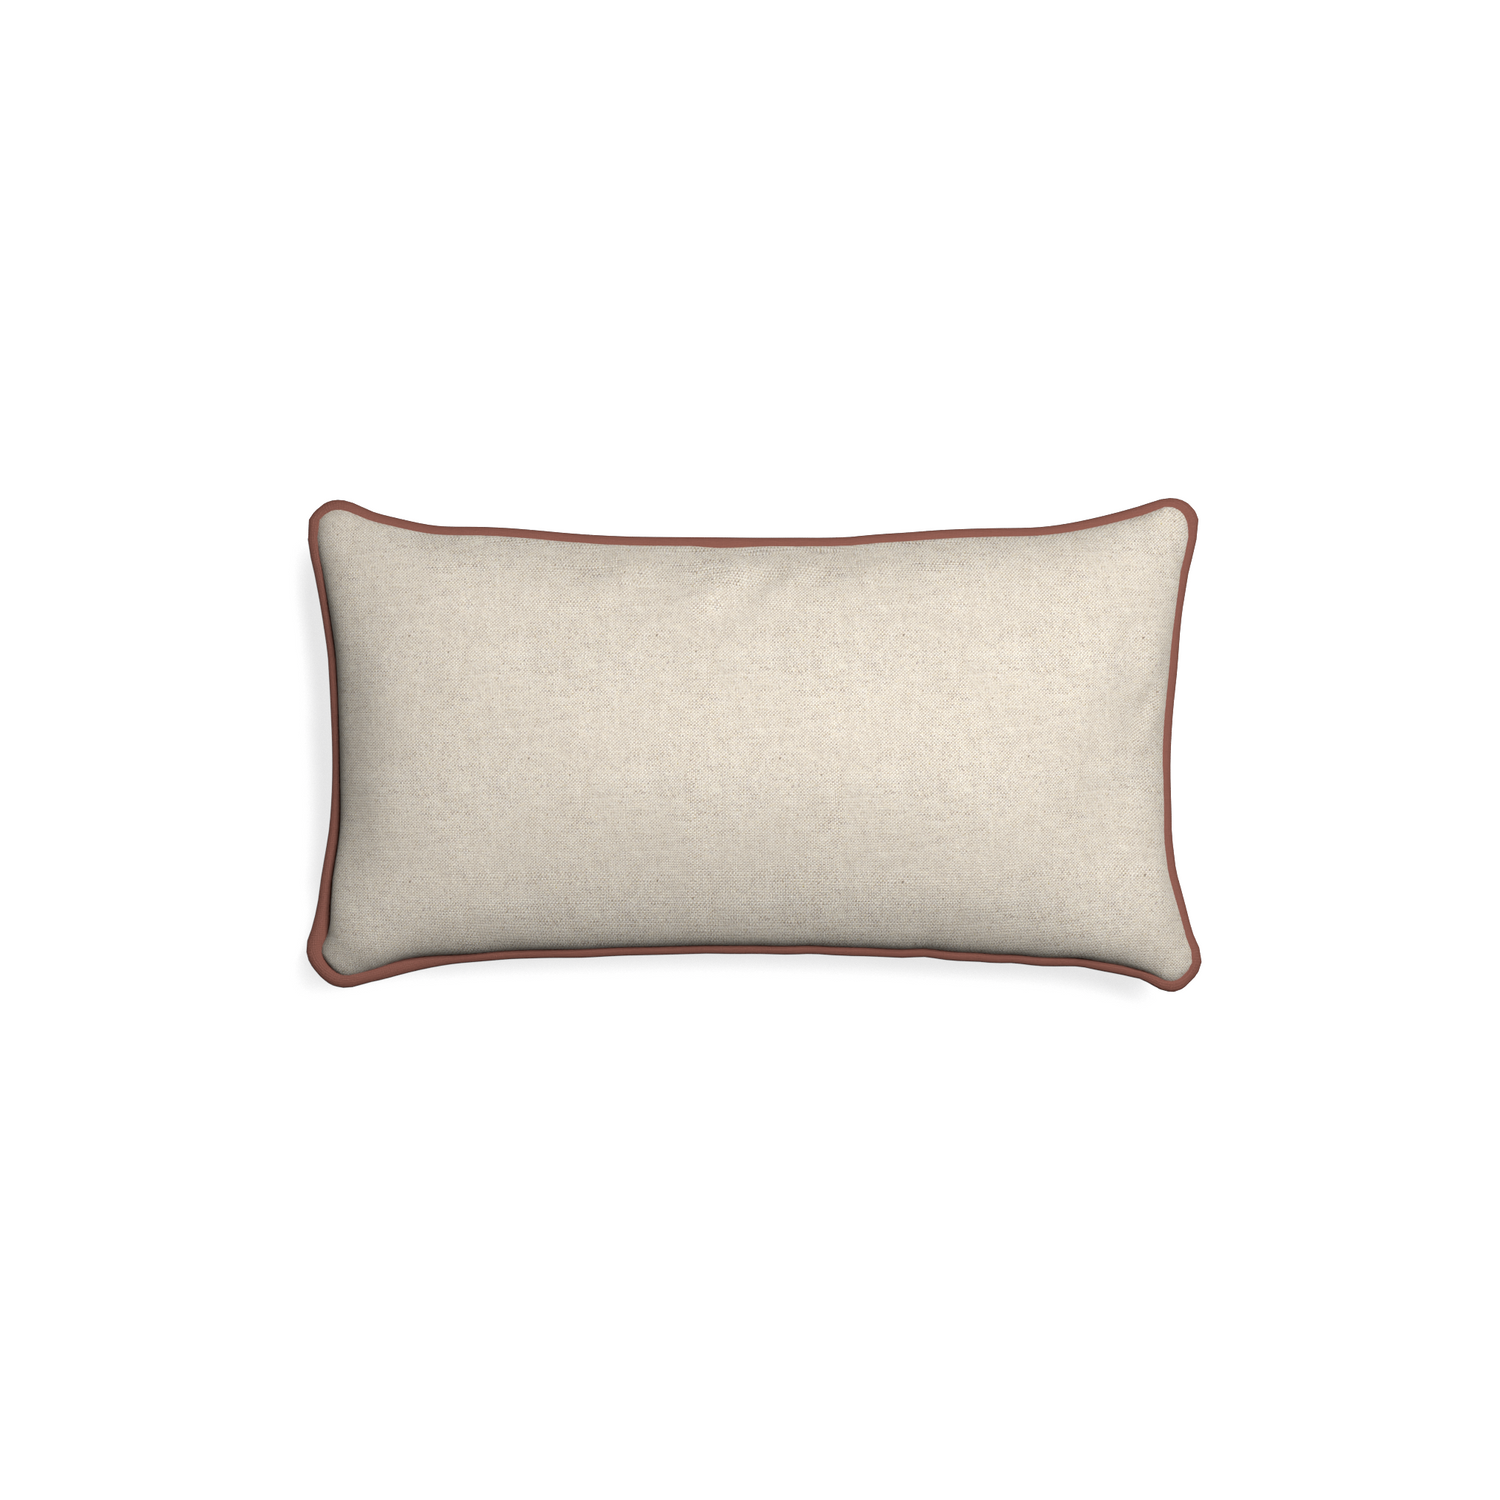 Petite-lumbar oat custom light brownpillow with w piping on white background